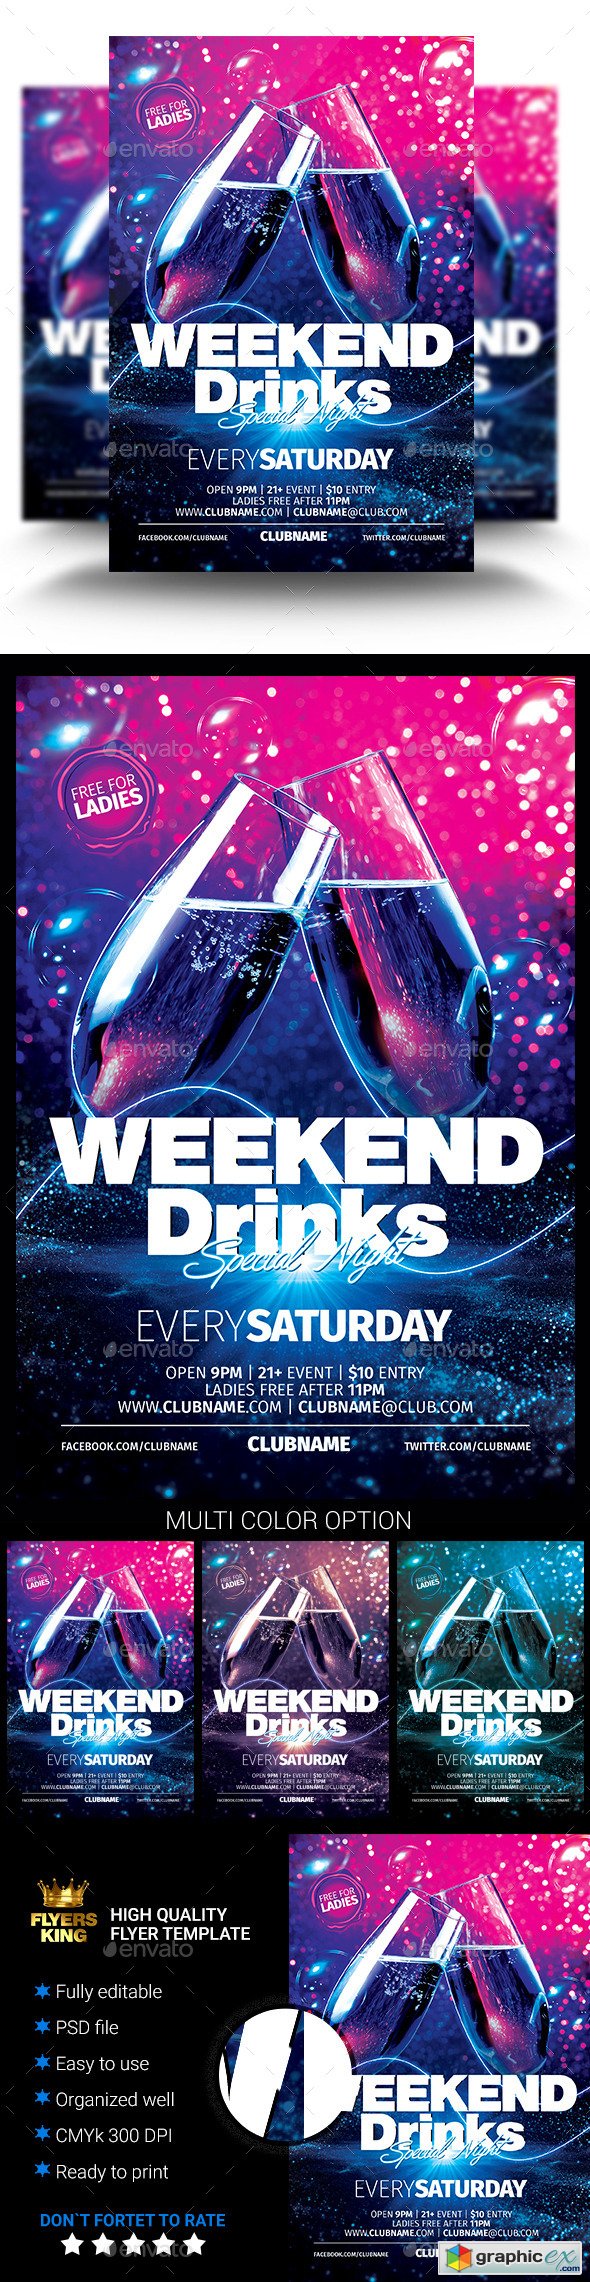 Weekend Drinks Party Flyer